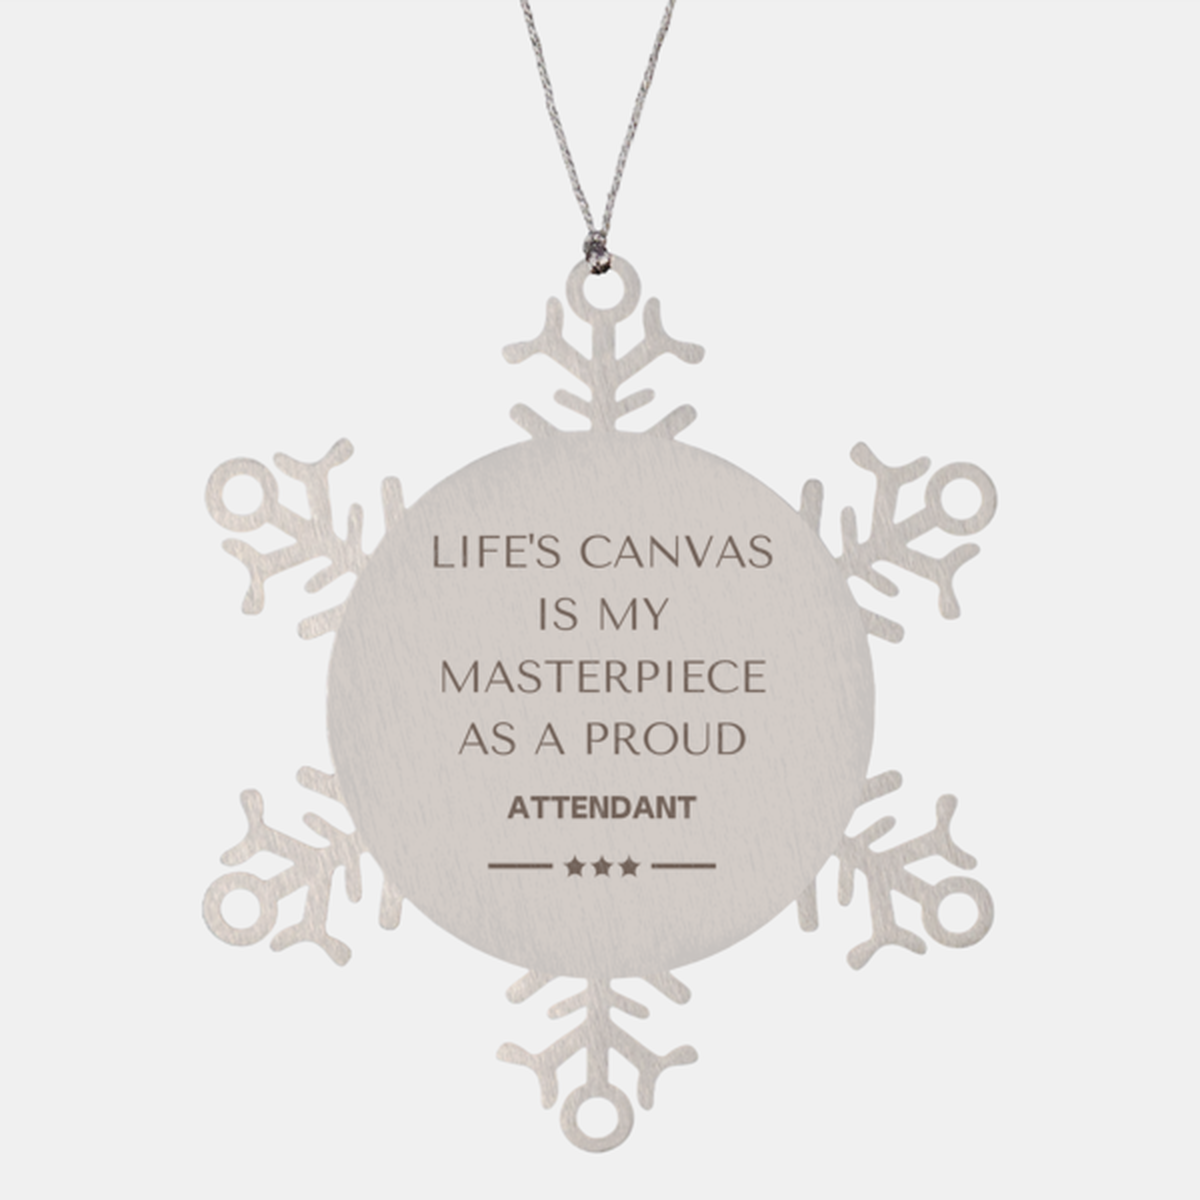 Proud Attendant Gifts, Life's canvas is my masterpiece, Epic Birthday Christmas Unique Snowflake Ornament For Attendant, Coworkers, Men, Women, Friends